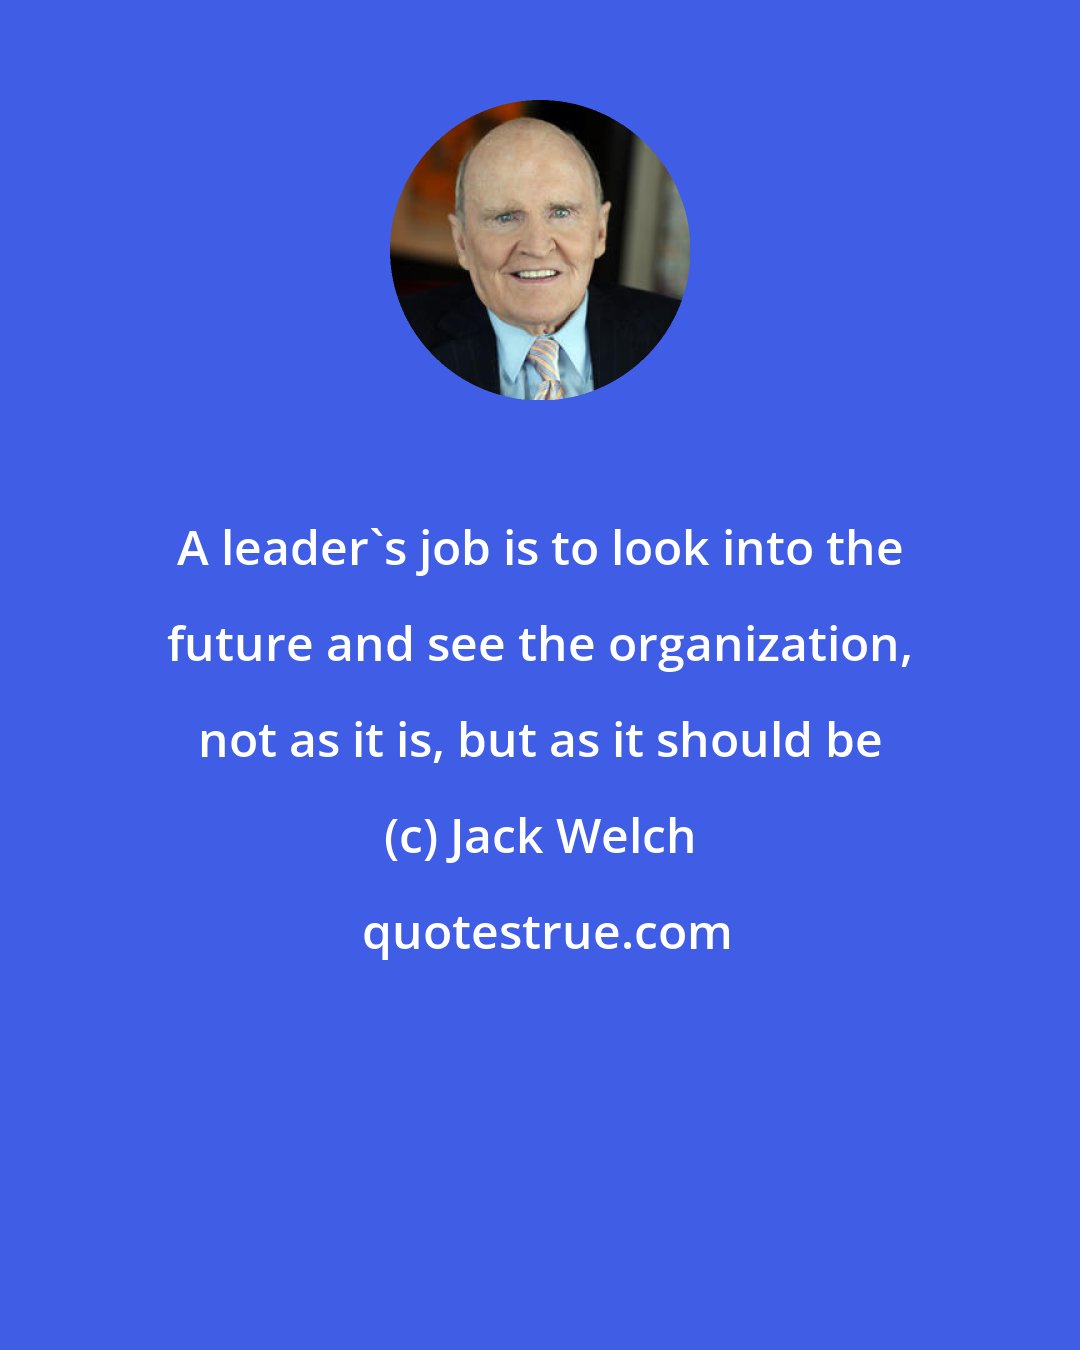 Jack Welch: A leader's job is to look into the future and see the organization, not as it is, but as it should be